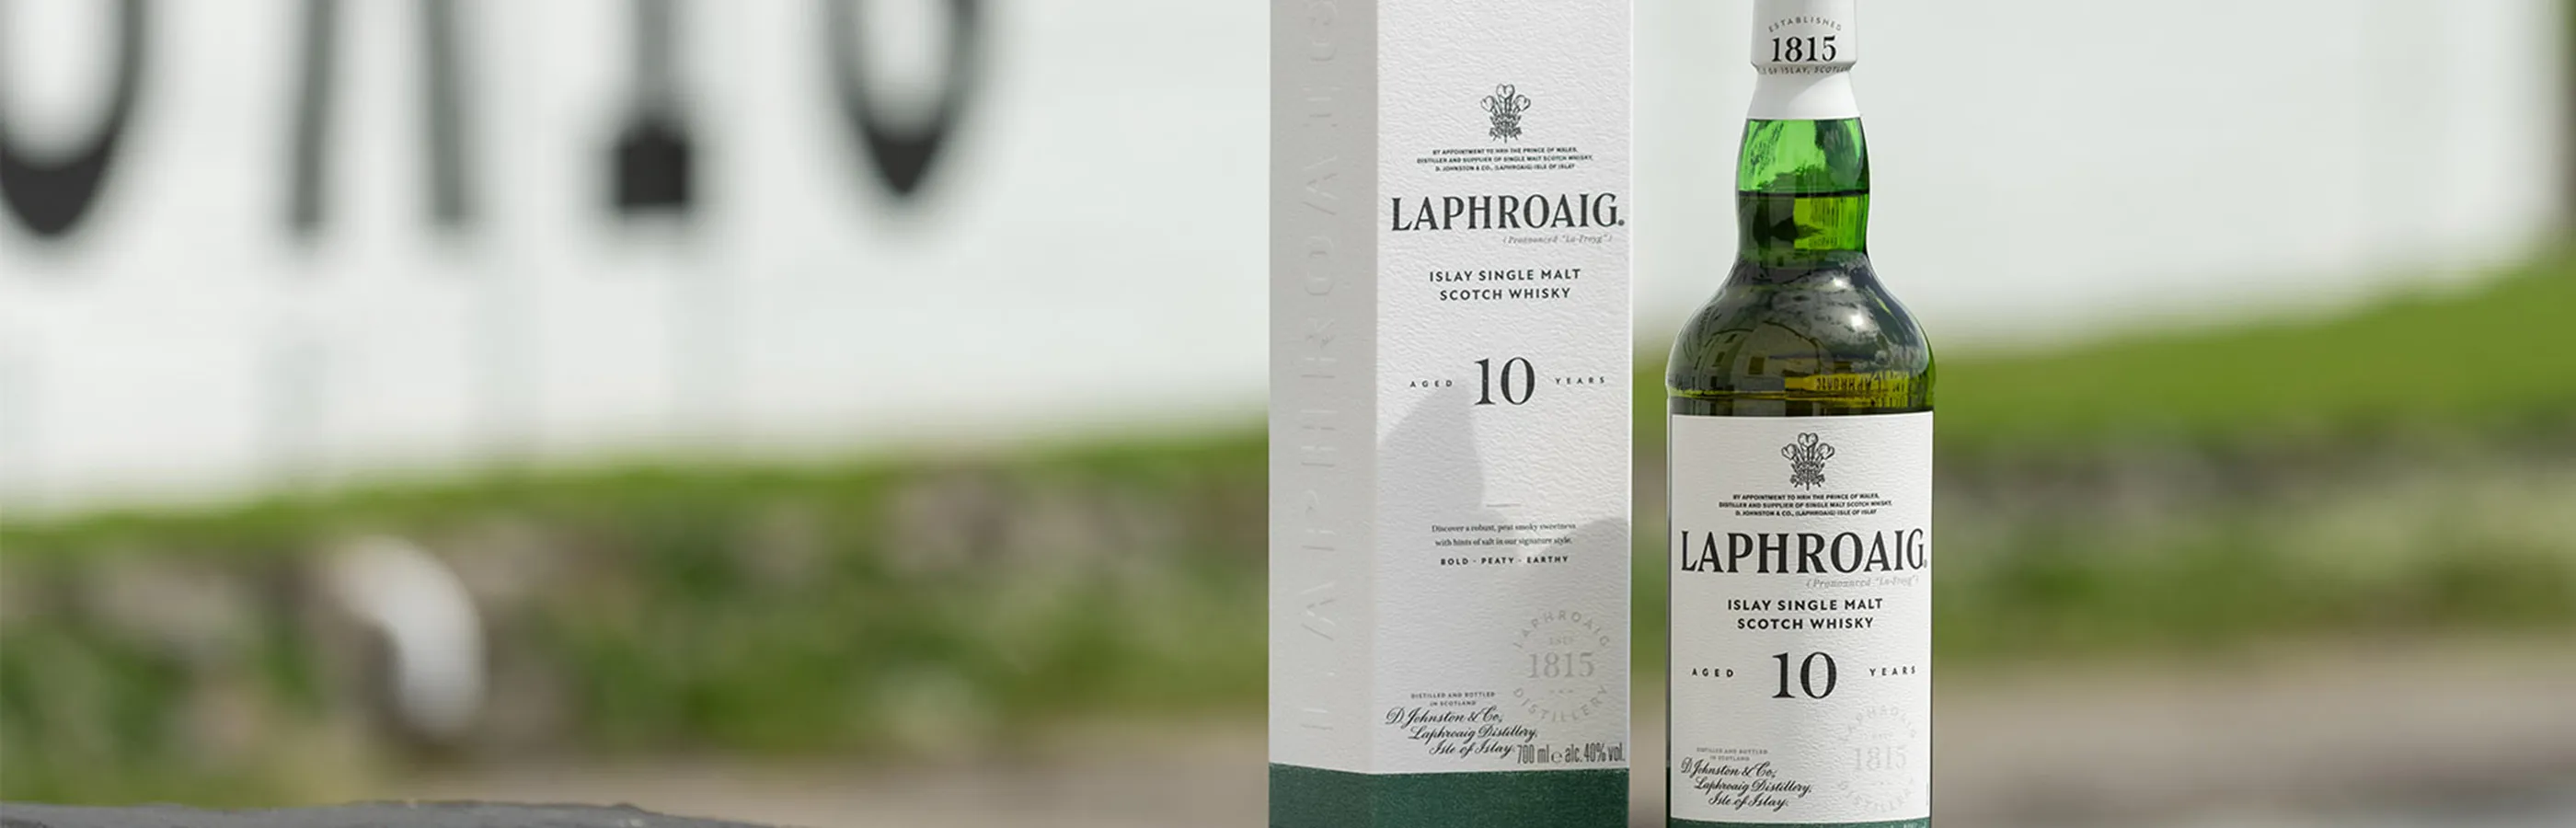 laphroaig unveils packaging redesign in line with long term sustainability goals